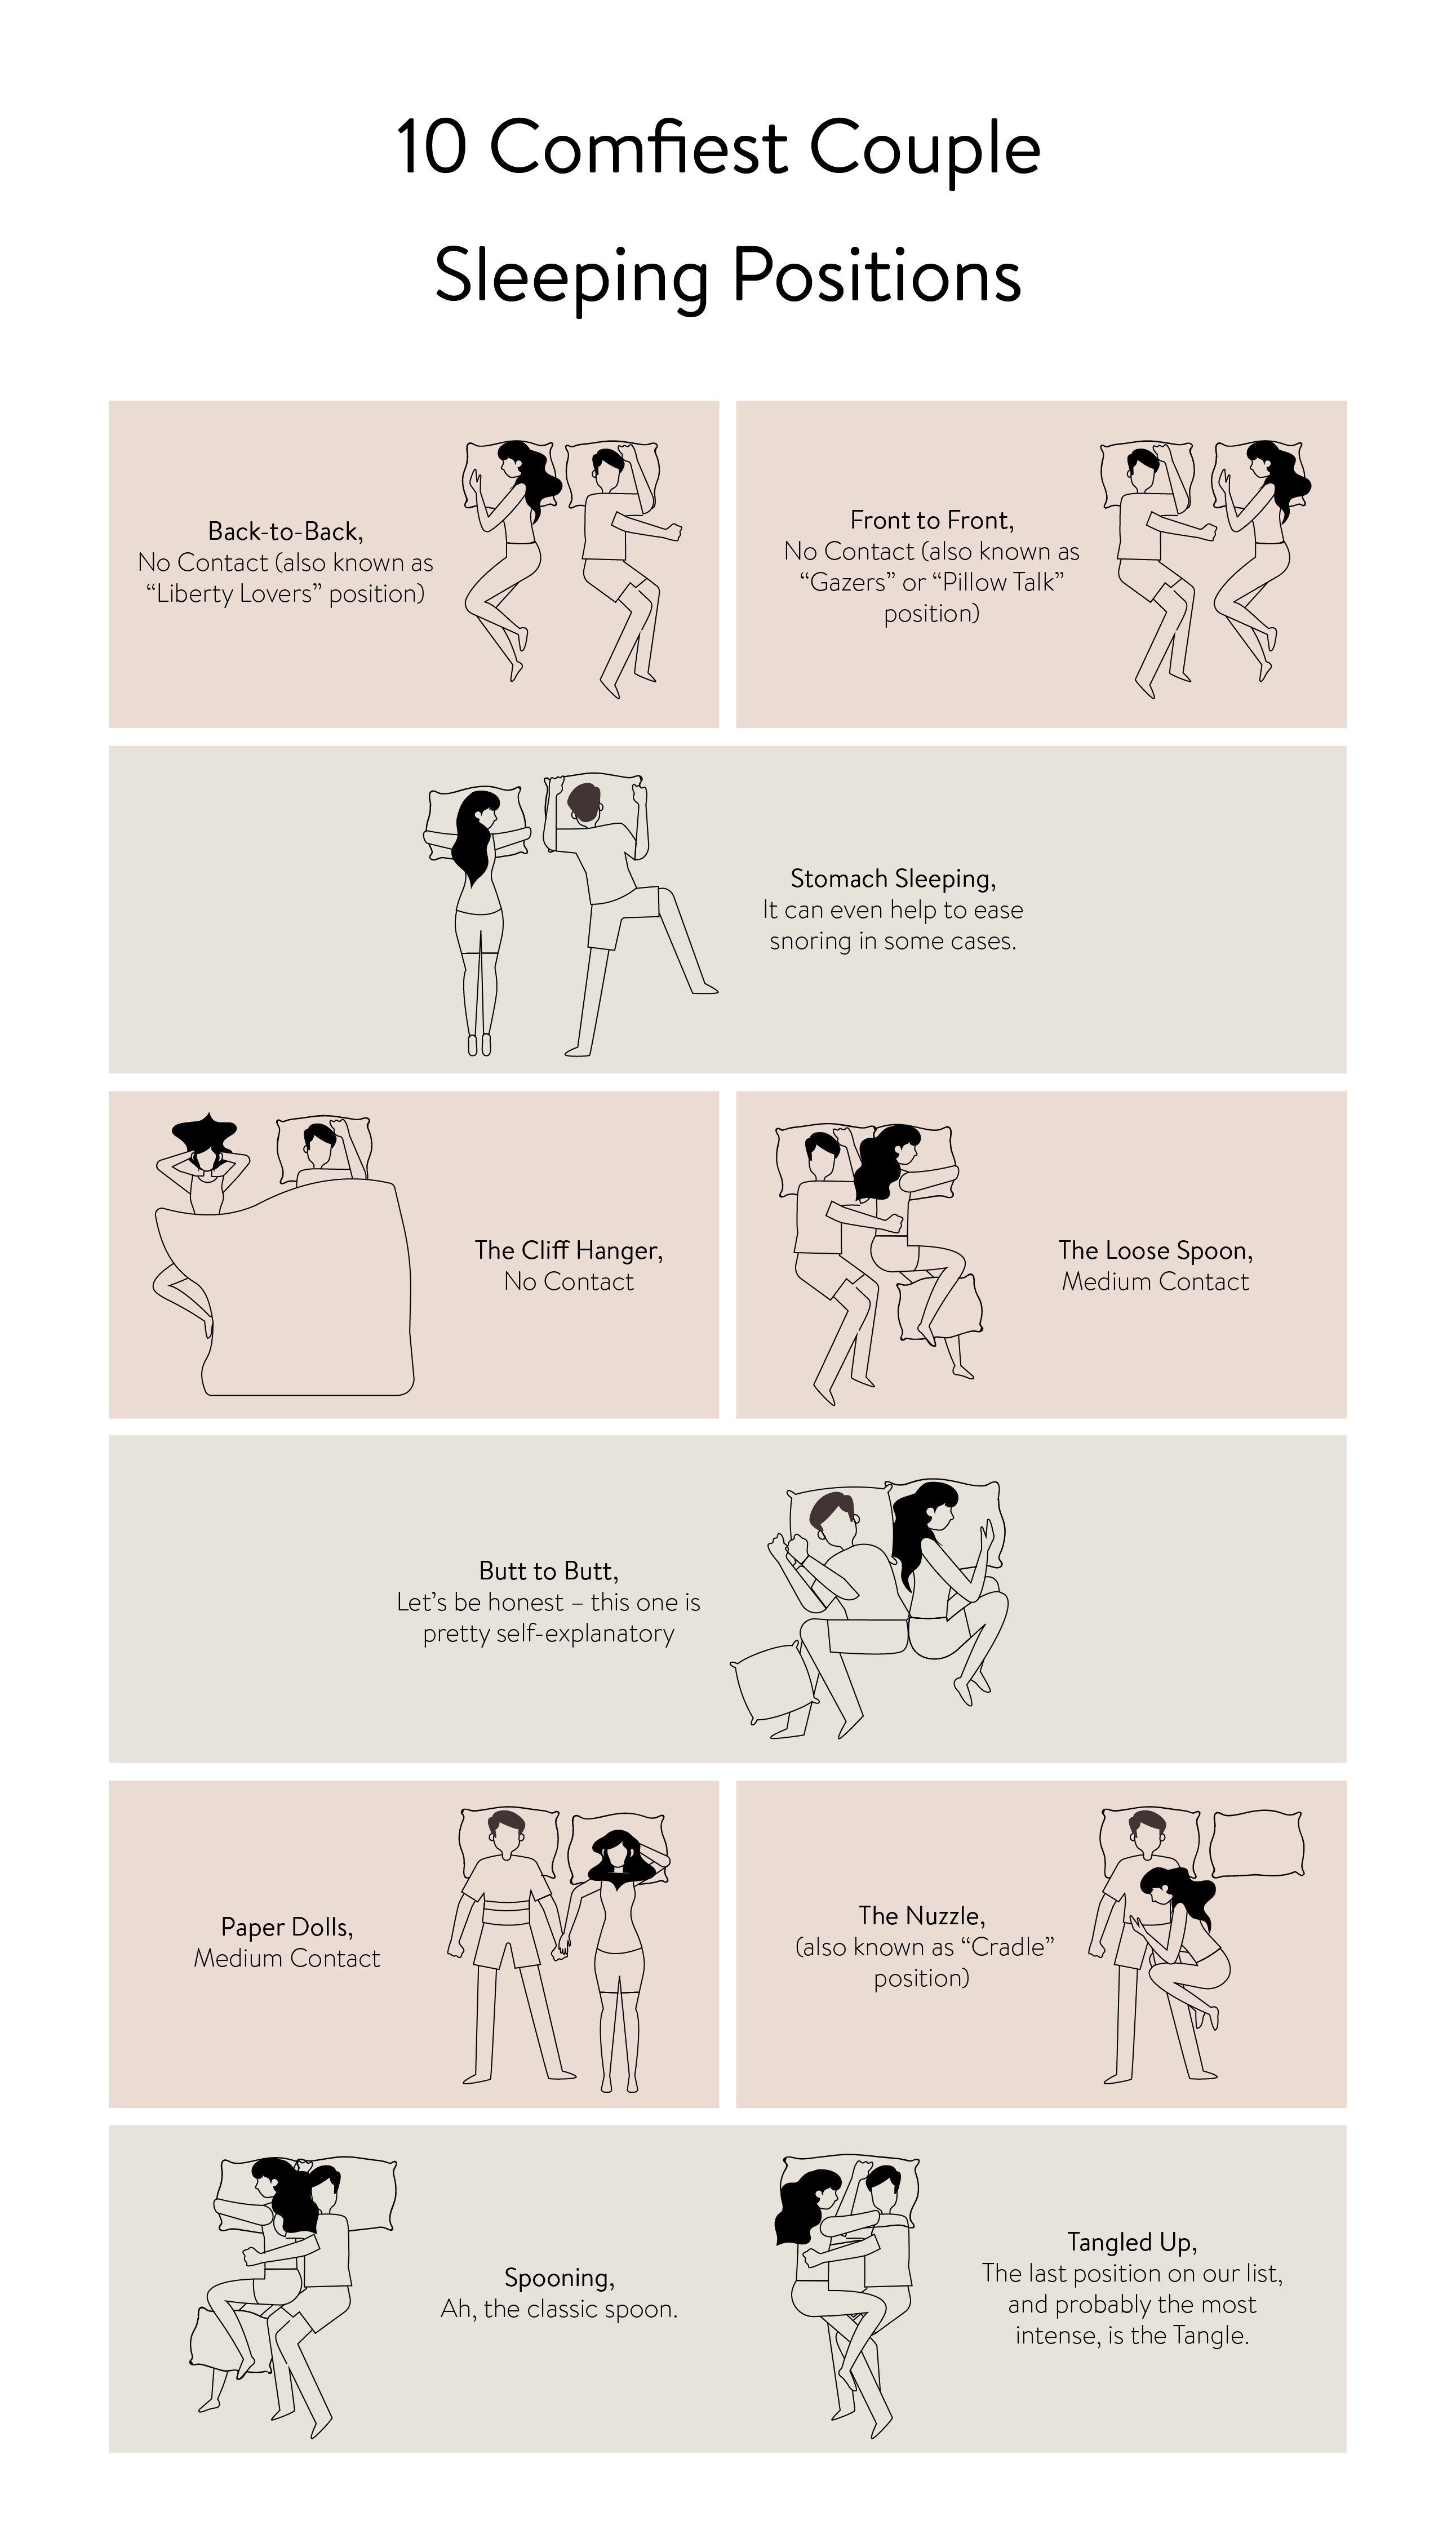 9 Couple Sleeping Positions And What They Mean – Sunday Citizen